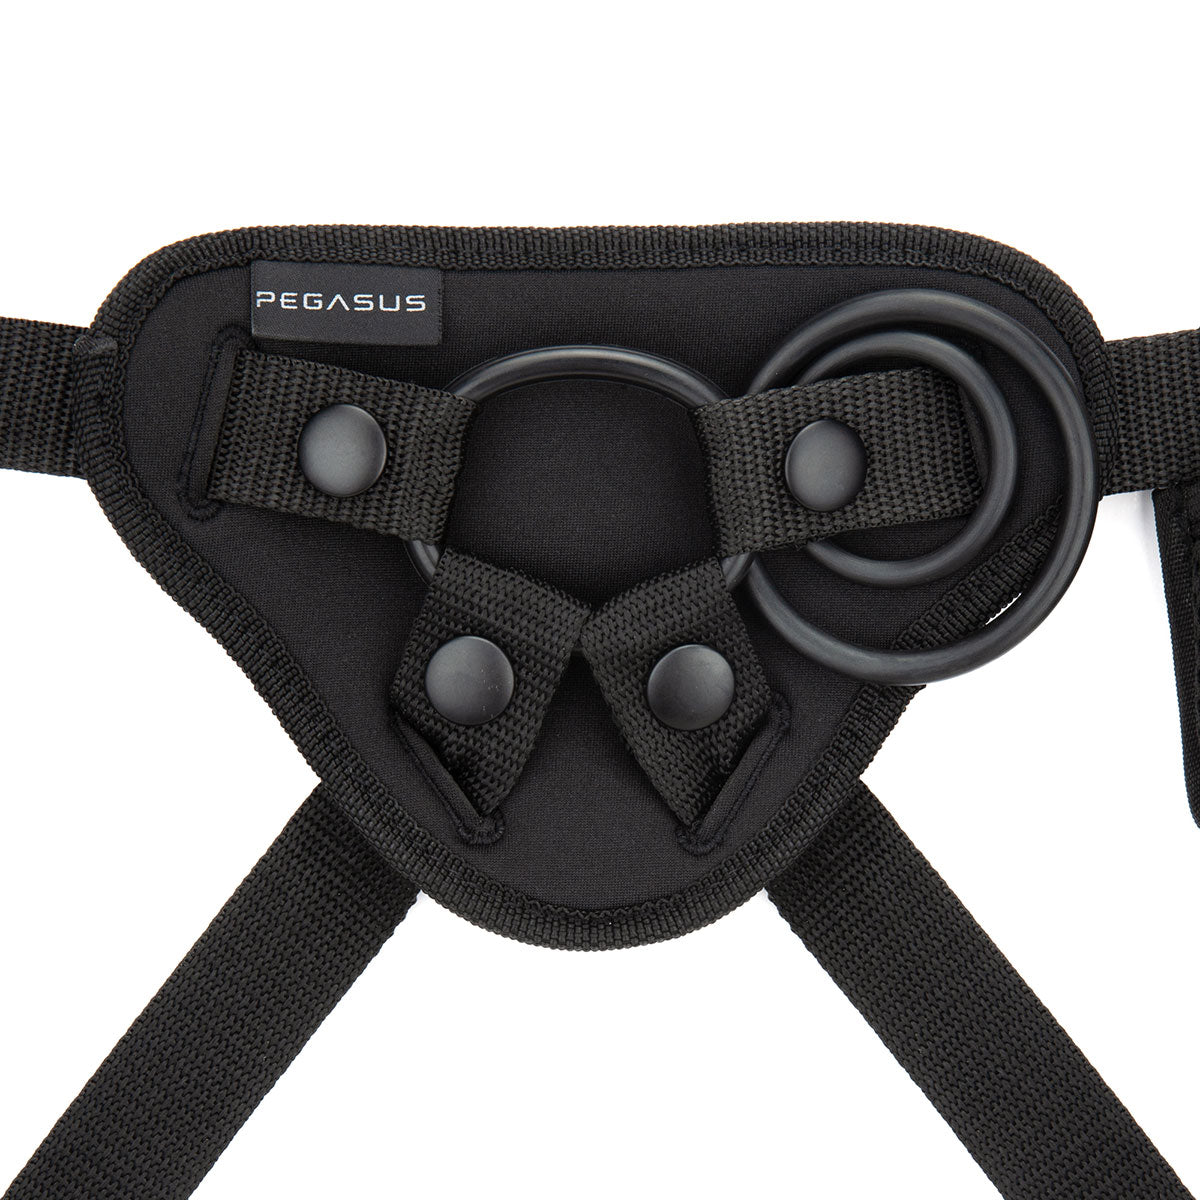 Pegasus Curved Ripple 6-inch Harness Kit